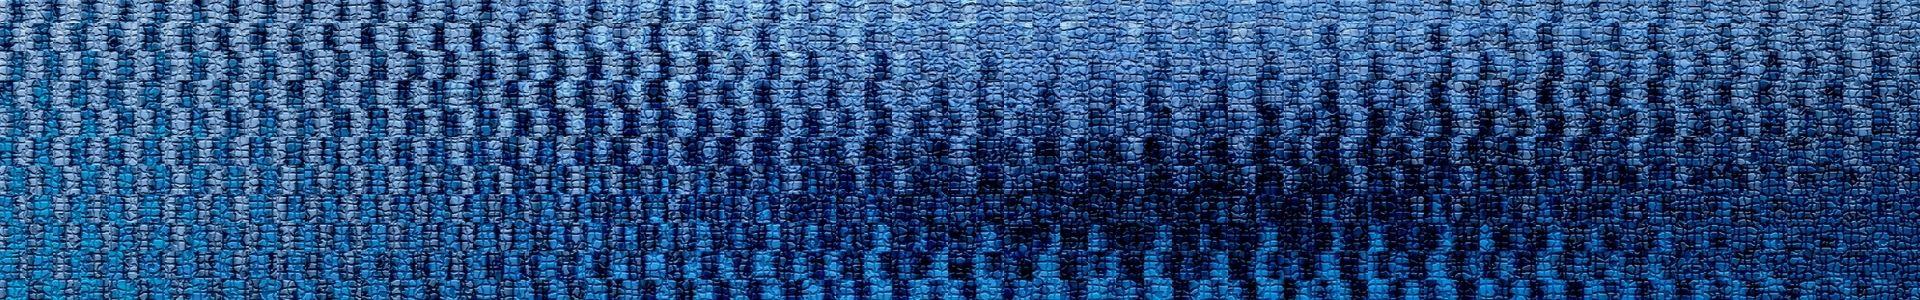 Different shades of blue stitching